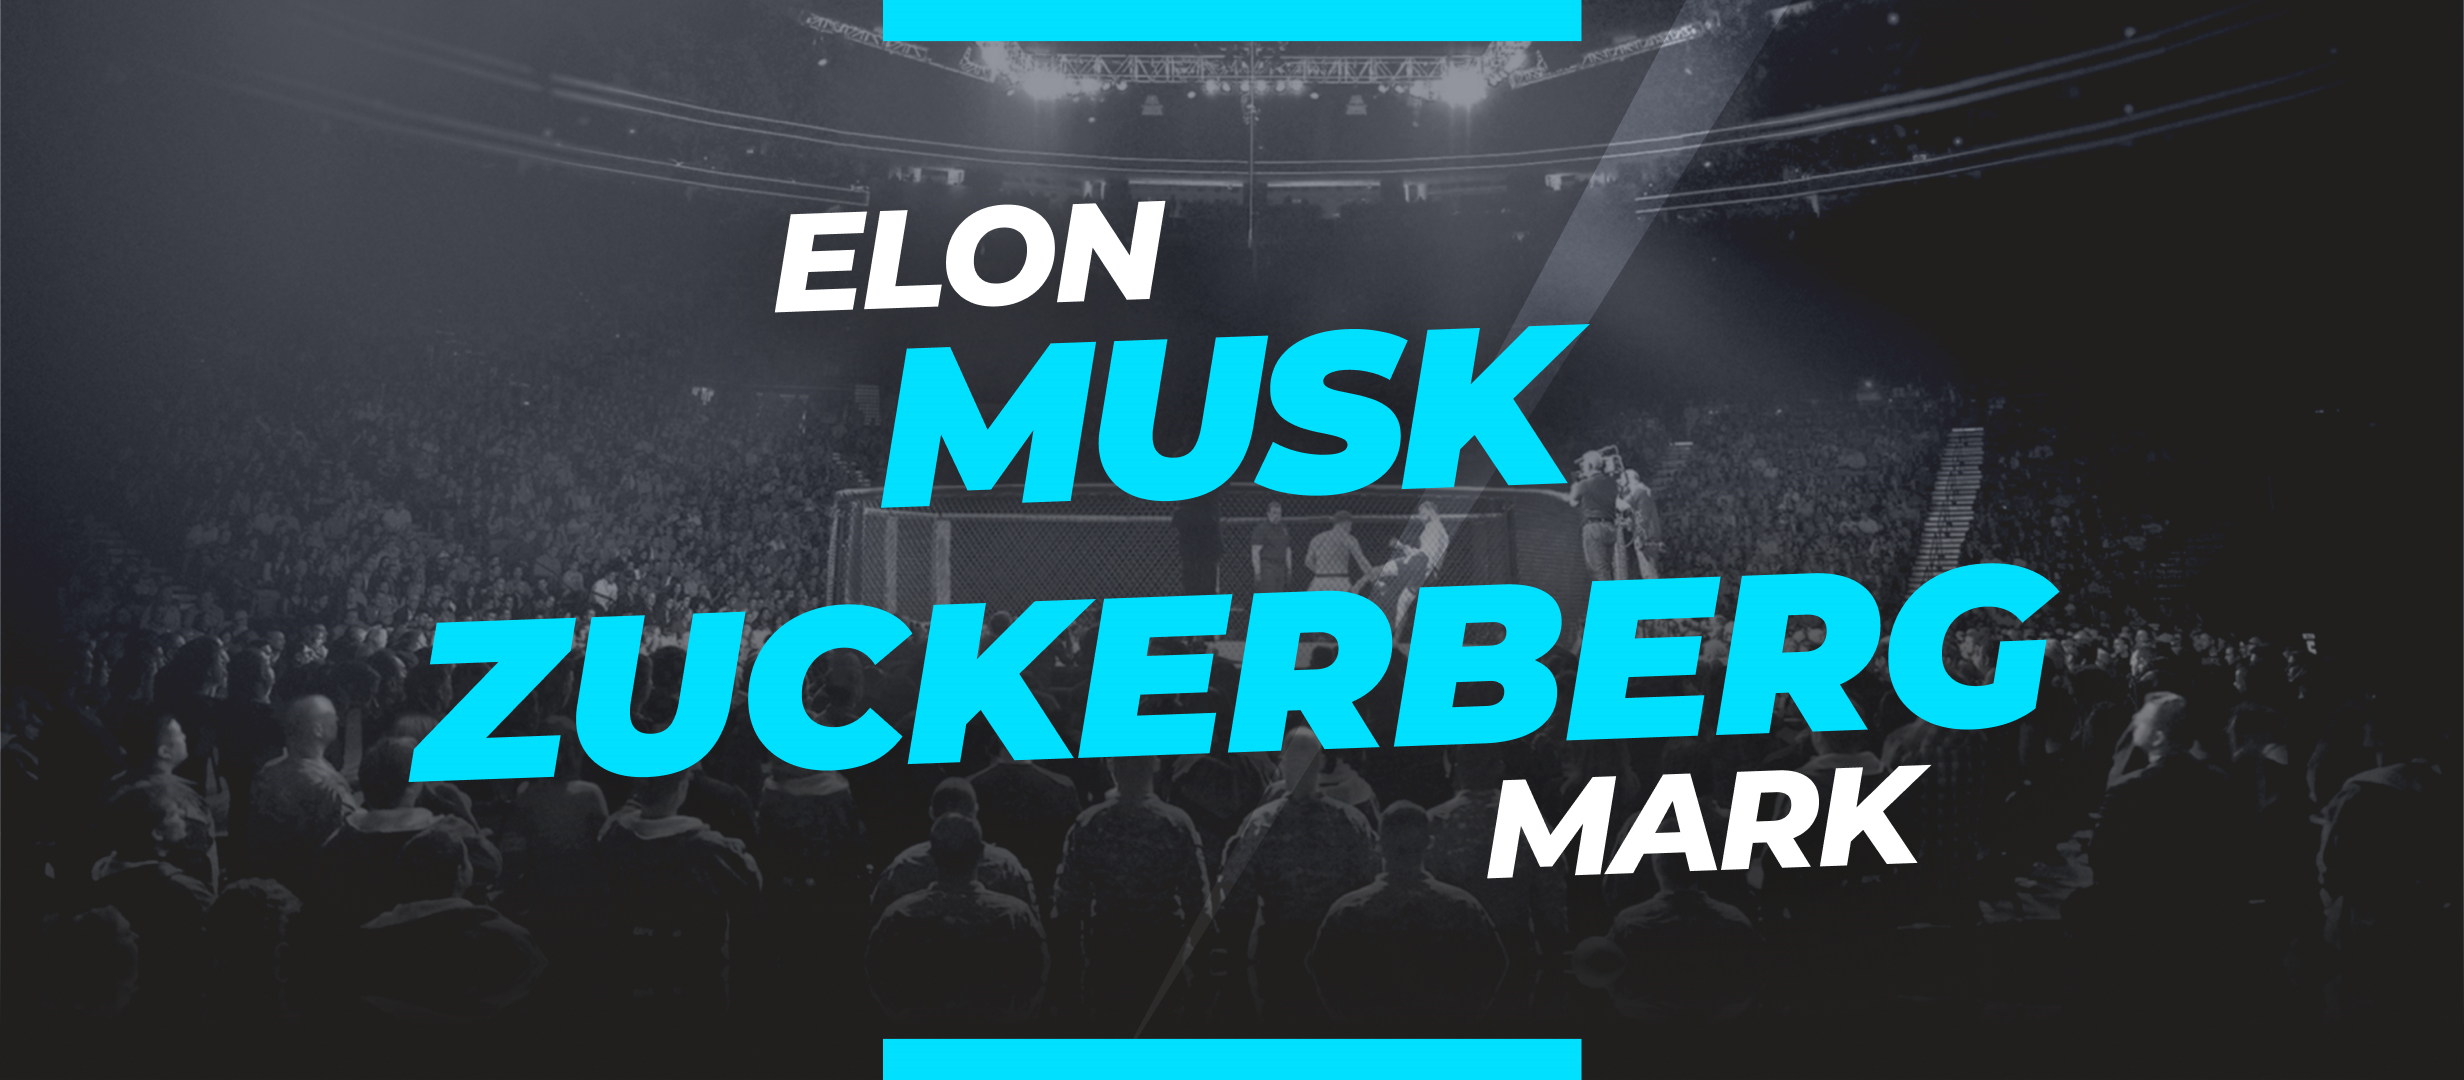 Musk vs Zuckerberg - Bets and odds for the fight